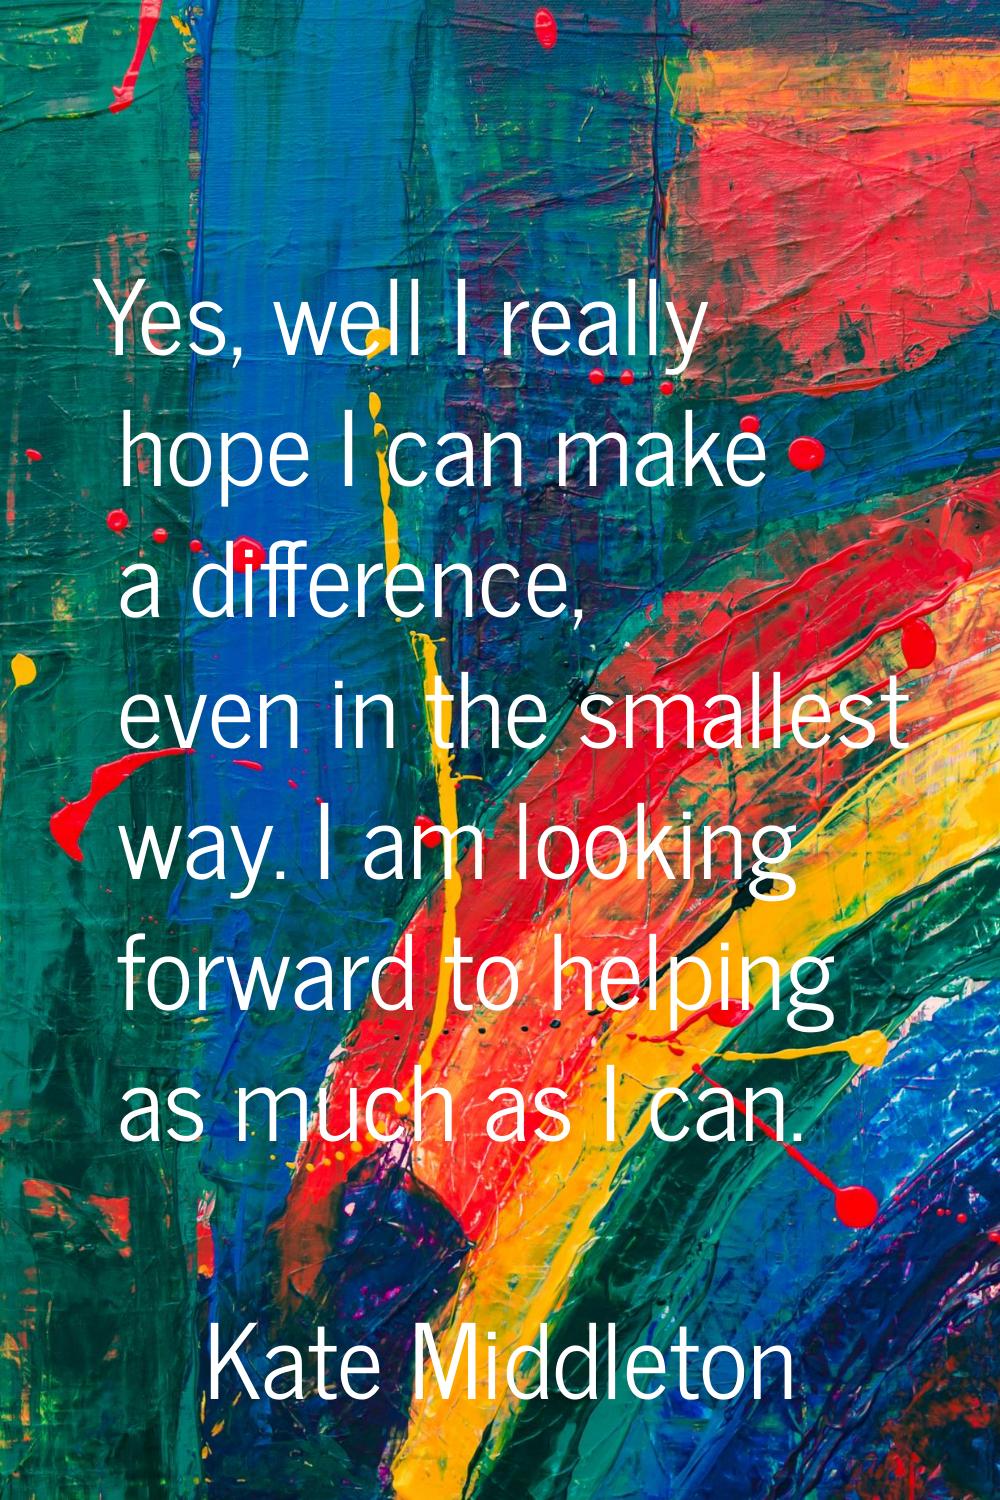 Yes, well I really hope I can make a difference, even in the smallest way. I am looking forward to 